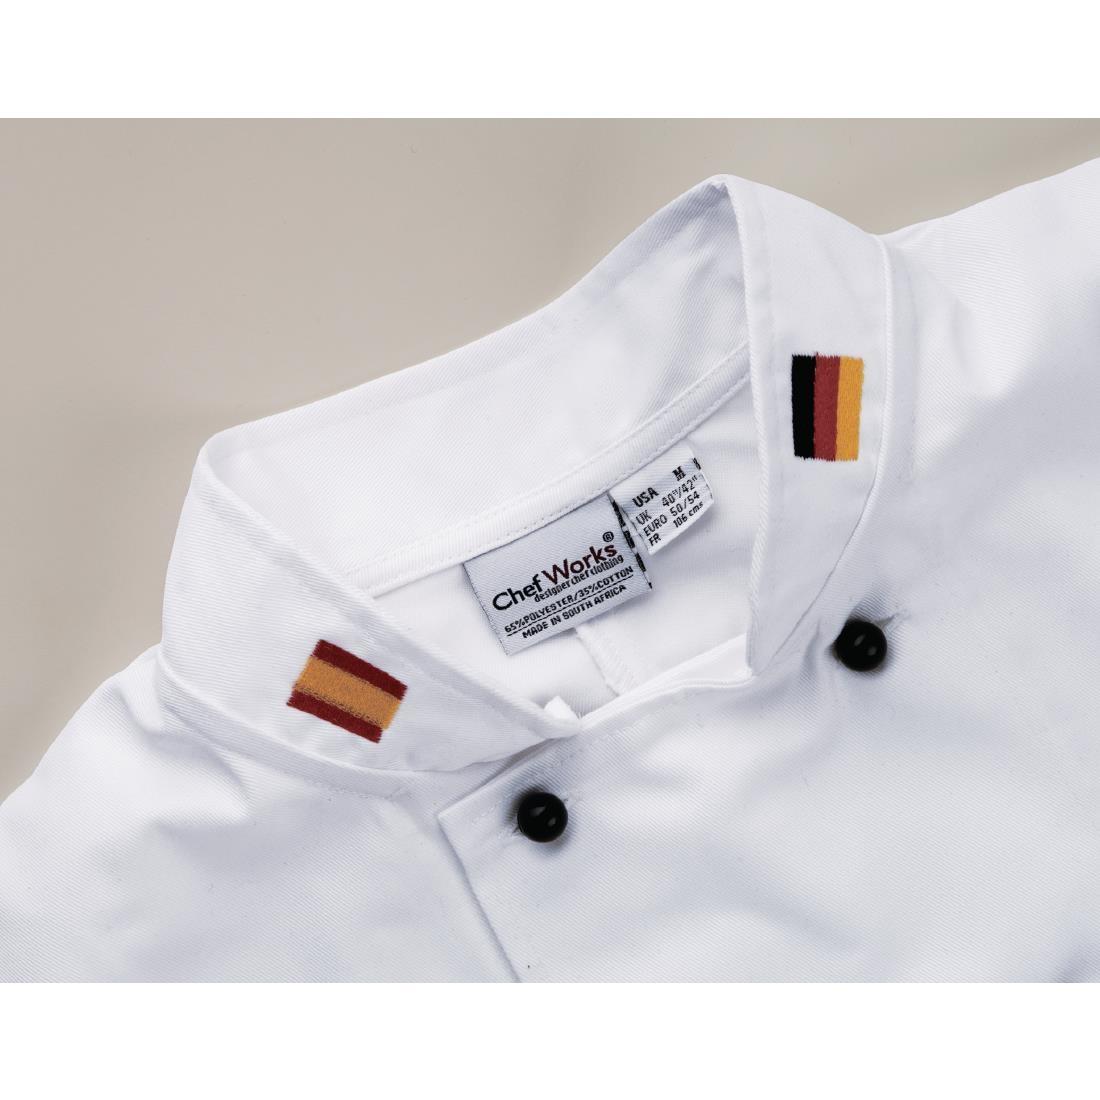 Embroidery Collar Flags - A987-SE  - 1